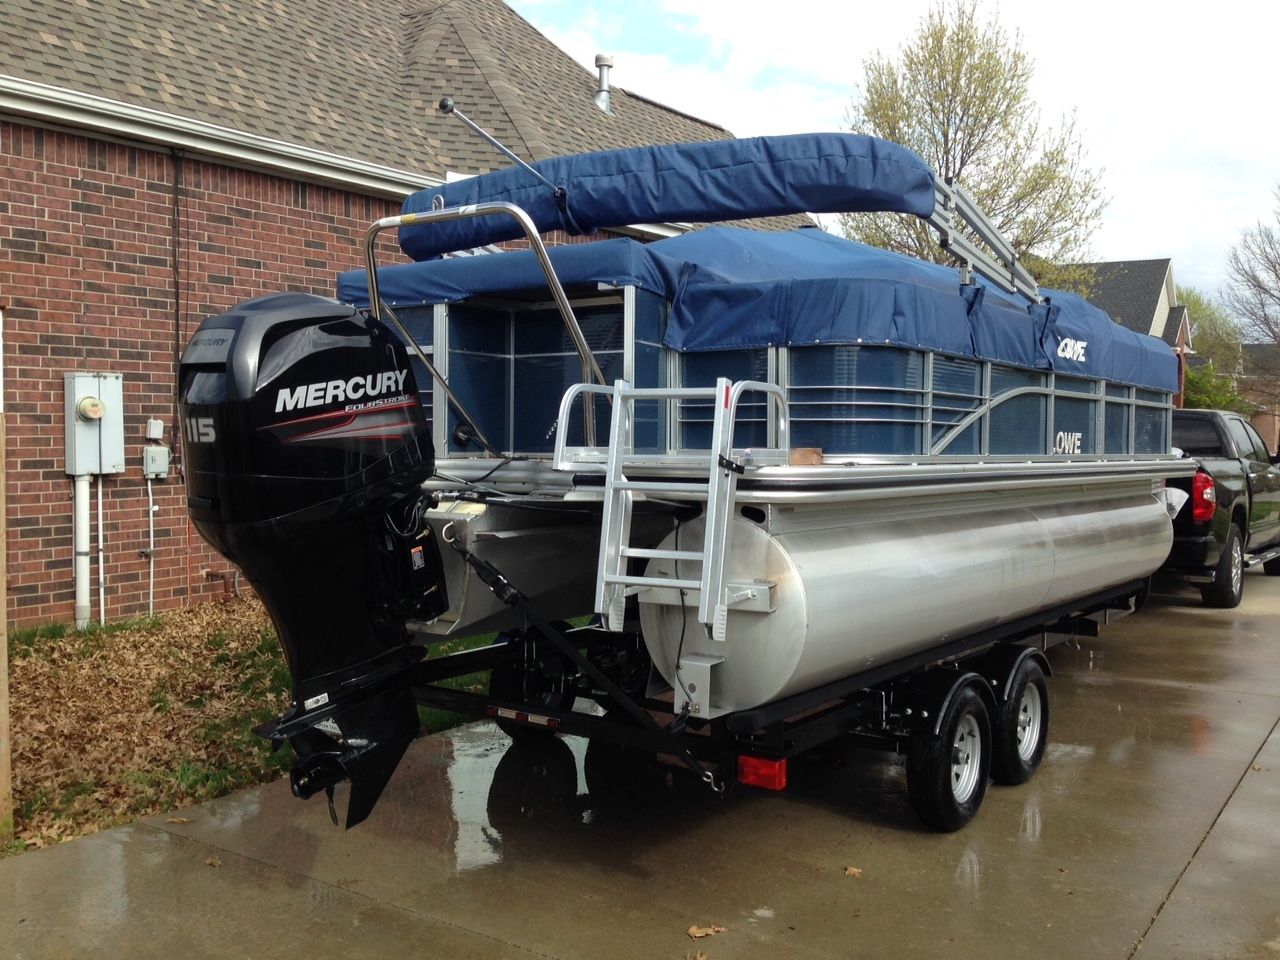 Lowe Ss210 Blue Tan Pontoon Boat W 115hp Mercury Four Stroke Engine 2014 For Sale For 100 Boats From Usa Com